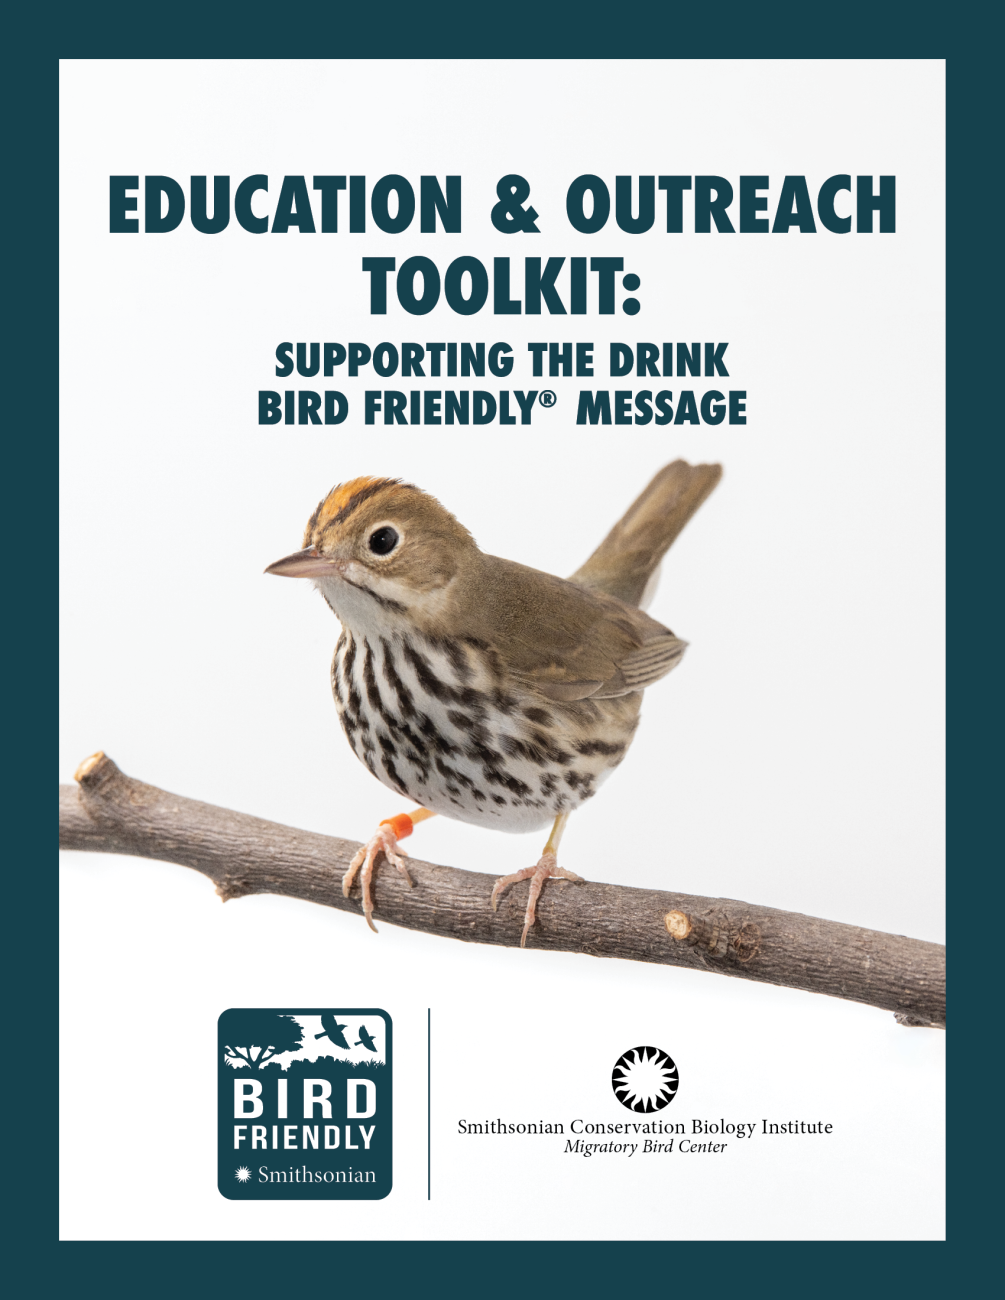 The first page of the "Education and Outreach: Supporting the Bird Friendly Message" toolkit featuring a wood thrush bird perched on a branch, and the Bird Friendly and Smithsonian Conservation Biology Institute logos